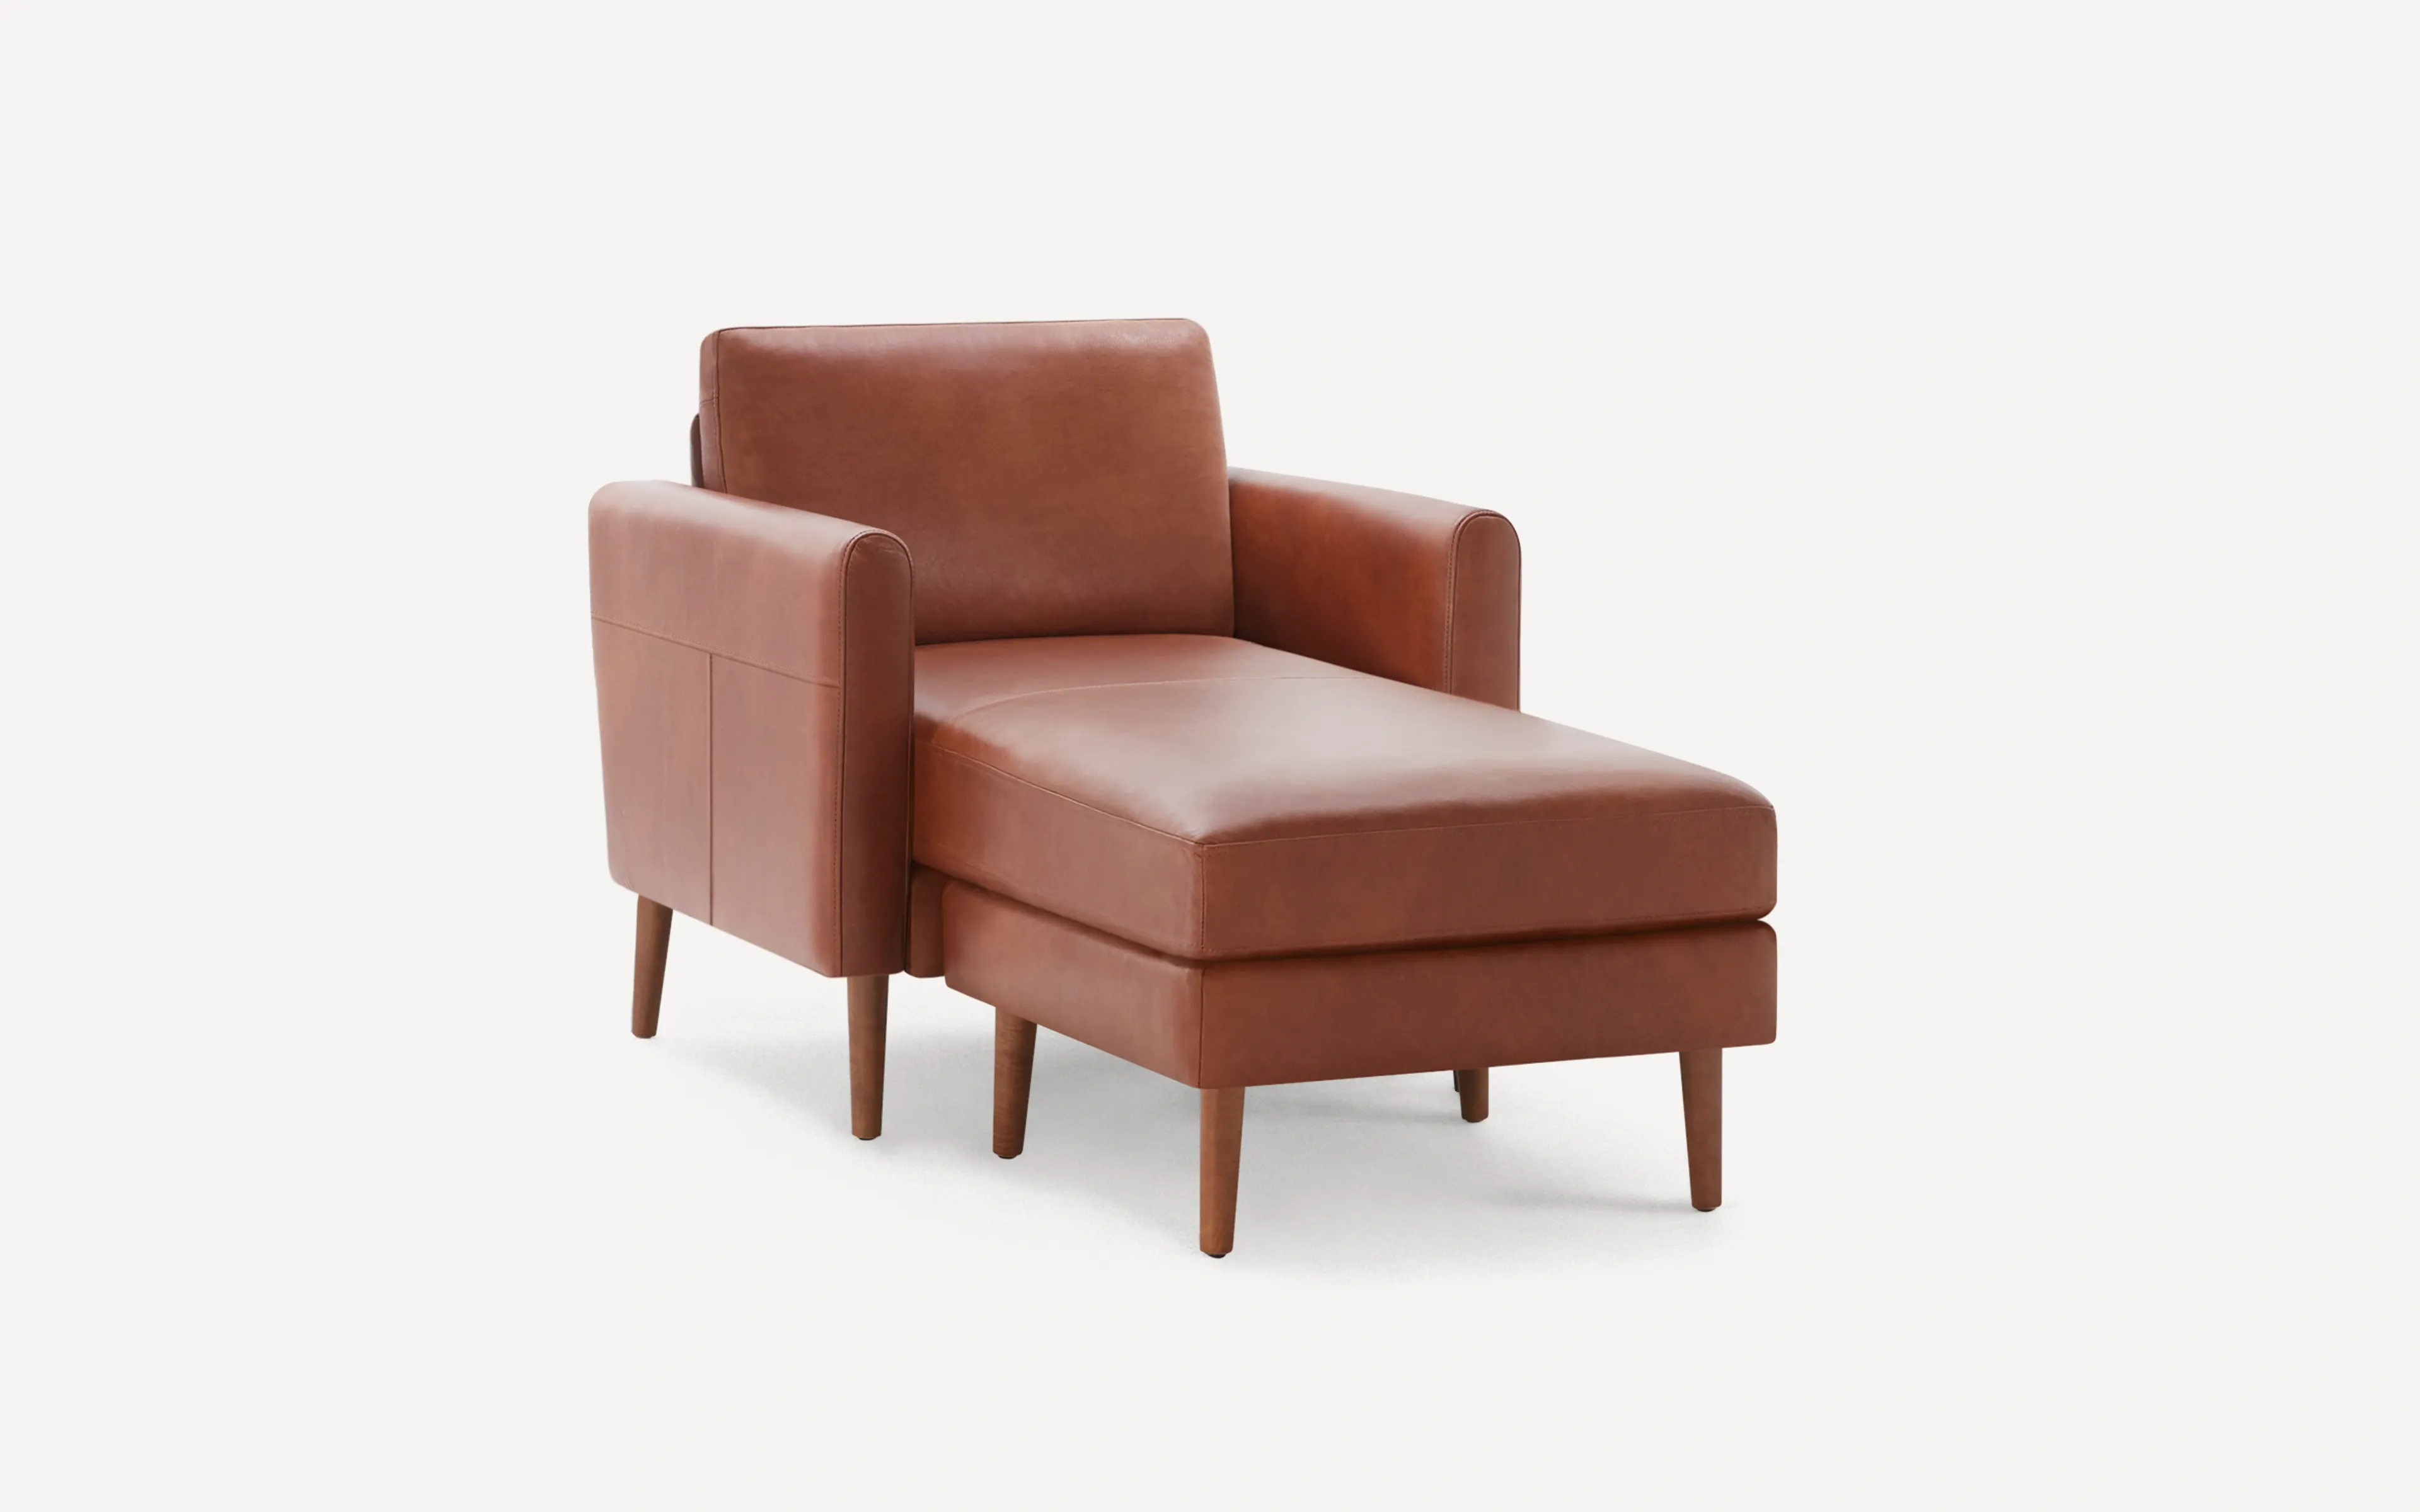 Original Nomad Chaise Armchair in Chestnut Leather